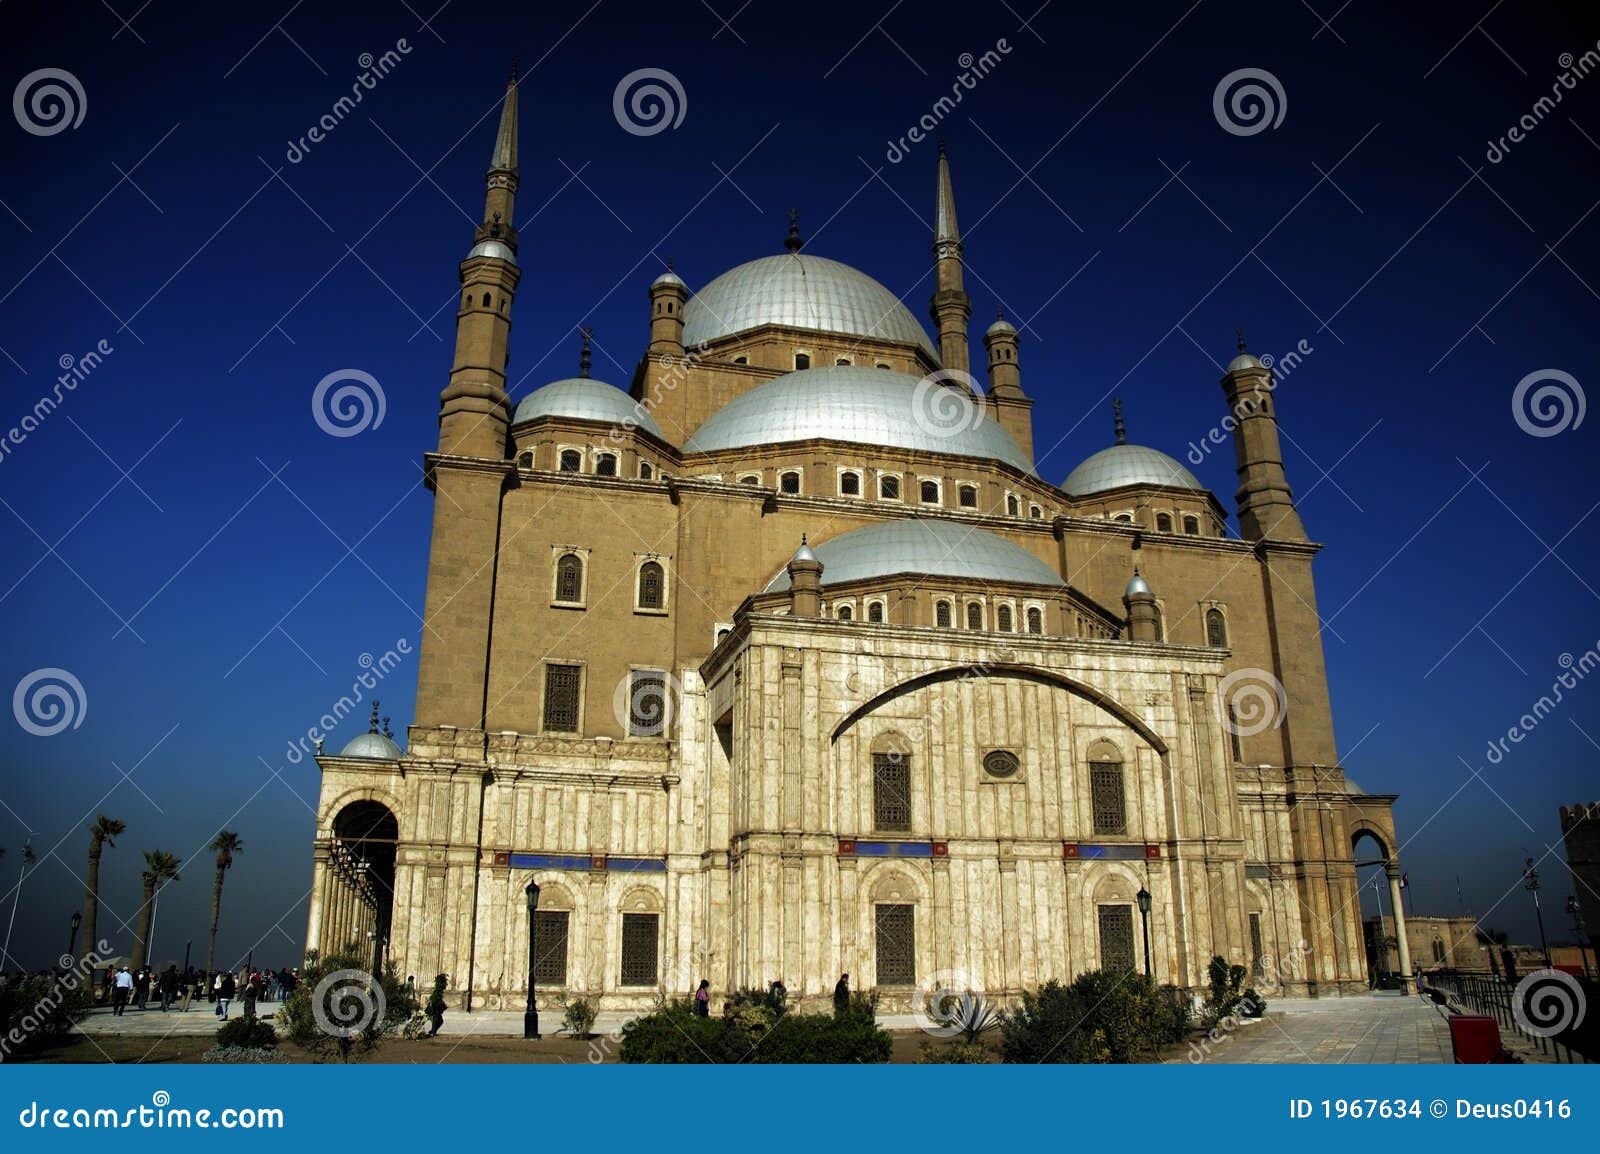 the mosque of al-nasir muhammad at the citadel in cairo